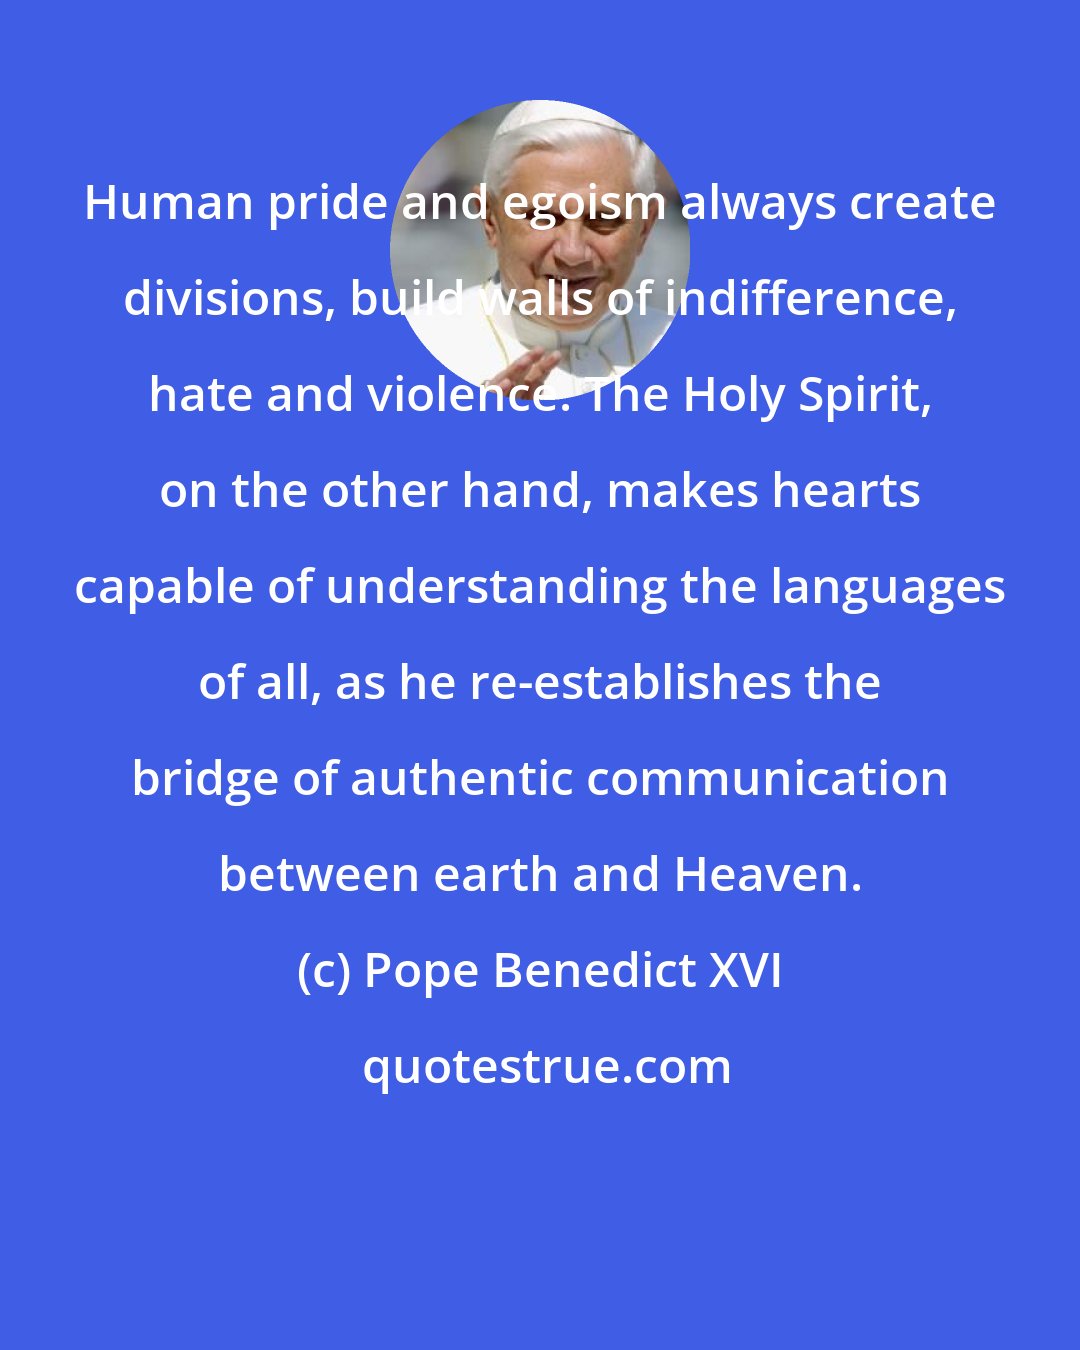 Pope Benedict XVI: Human pride and egoism always create divisions, build walls of indifference, hate and violence. The Holy Spirit, on the other hand, makes hearts capable of understanding the languages of all, as he re-establishes the bridge of authentic communication between earth and Heaven.